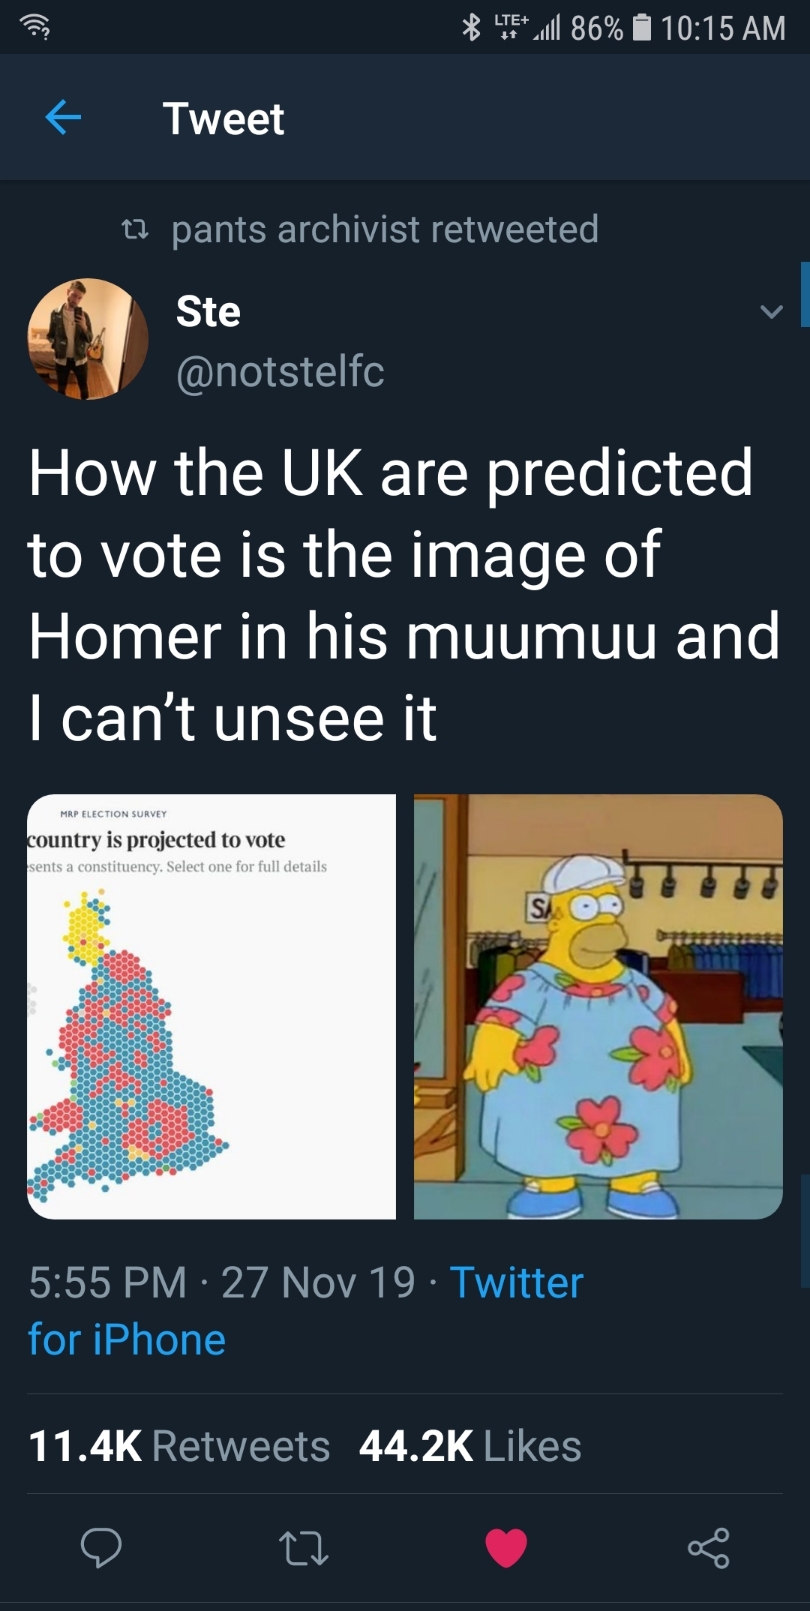 screenshot - Lte 86% i Tweet 1. pants archivist retweeted, Ste How the Uk are predicted to vote is the image of Homer in his muumuu and I can't unsee it Mrp Election Survey country is projected to vote sents a constituency. Select one for full details D p